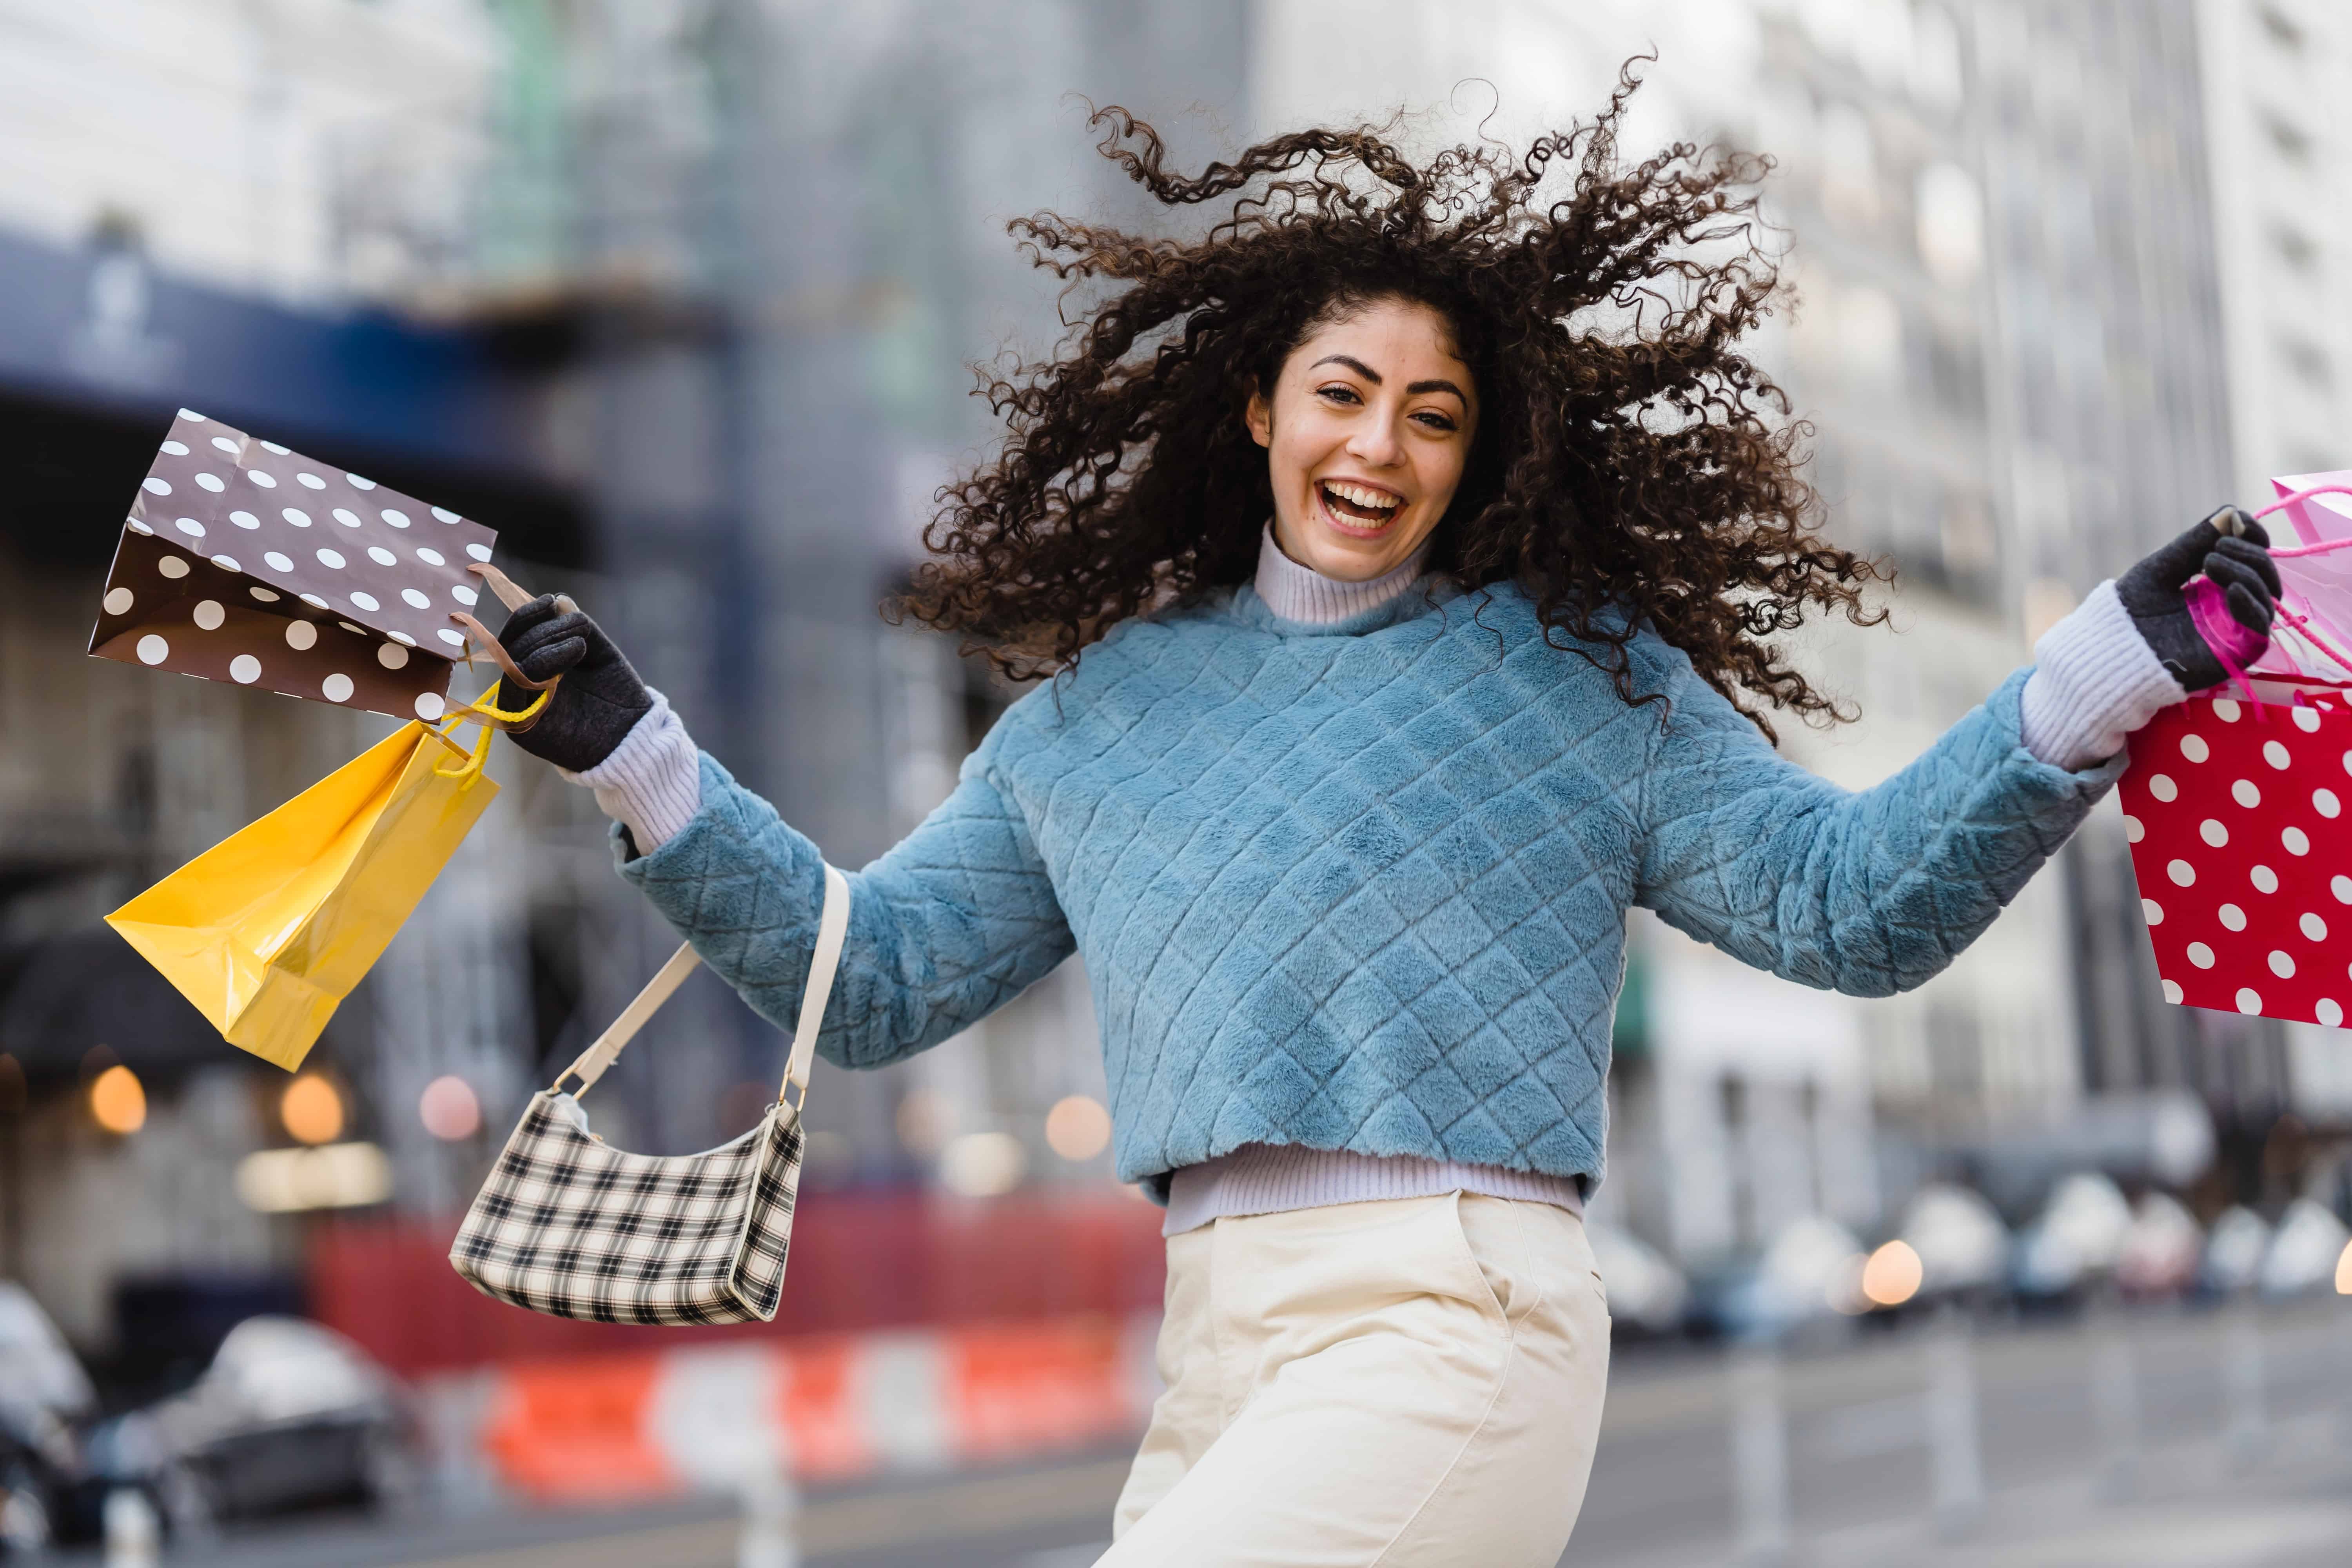 Photo by Tim Douglas : https://www.pexels.com/photo/happy-woman-jumping-with-shopping-bags-6567607/